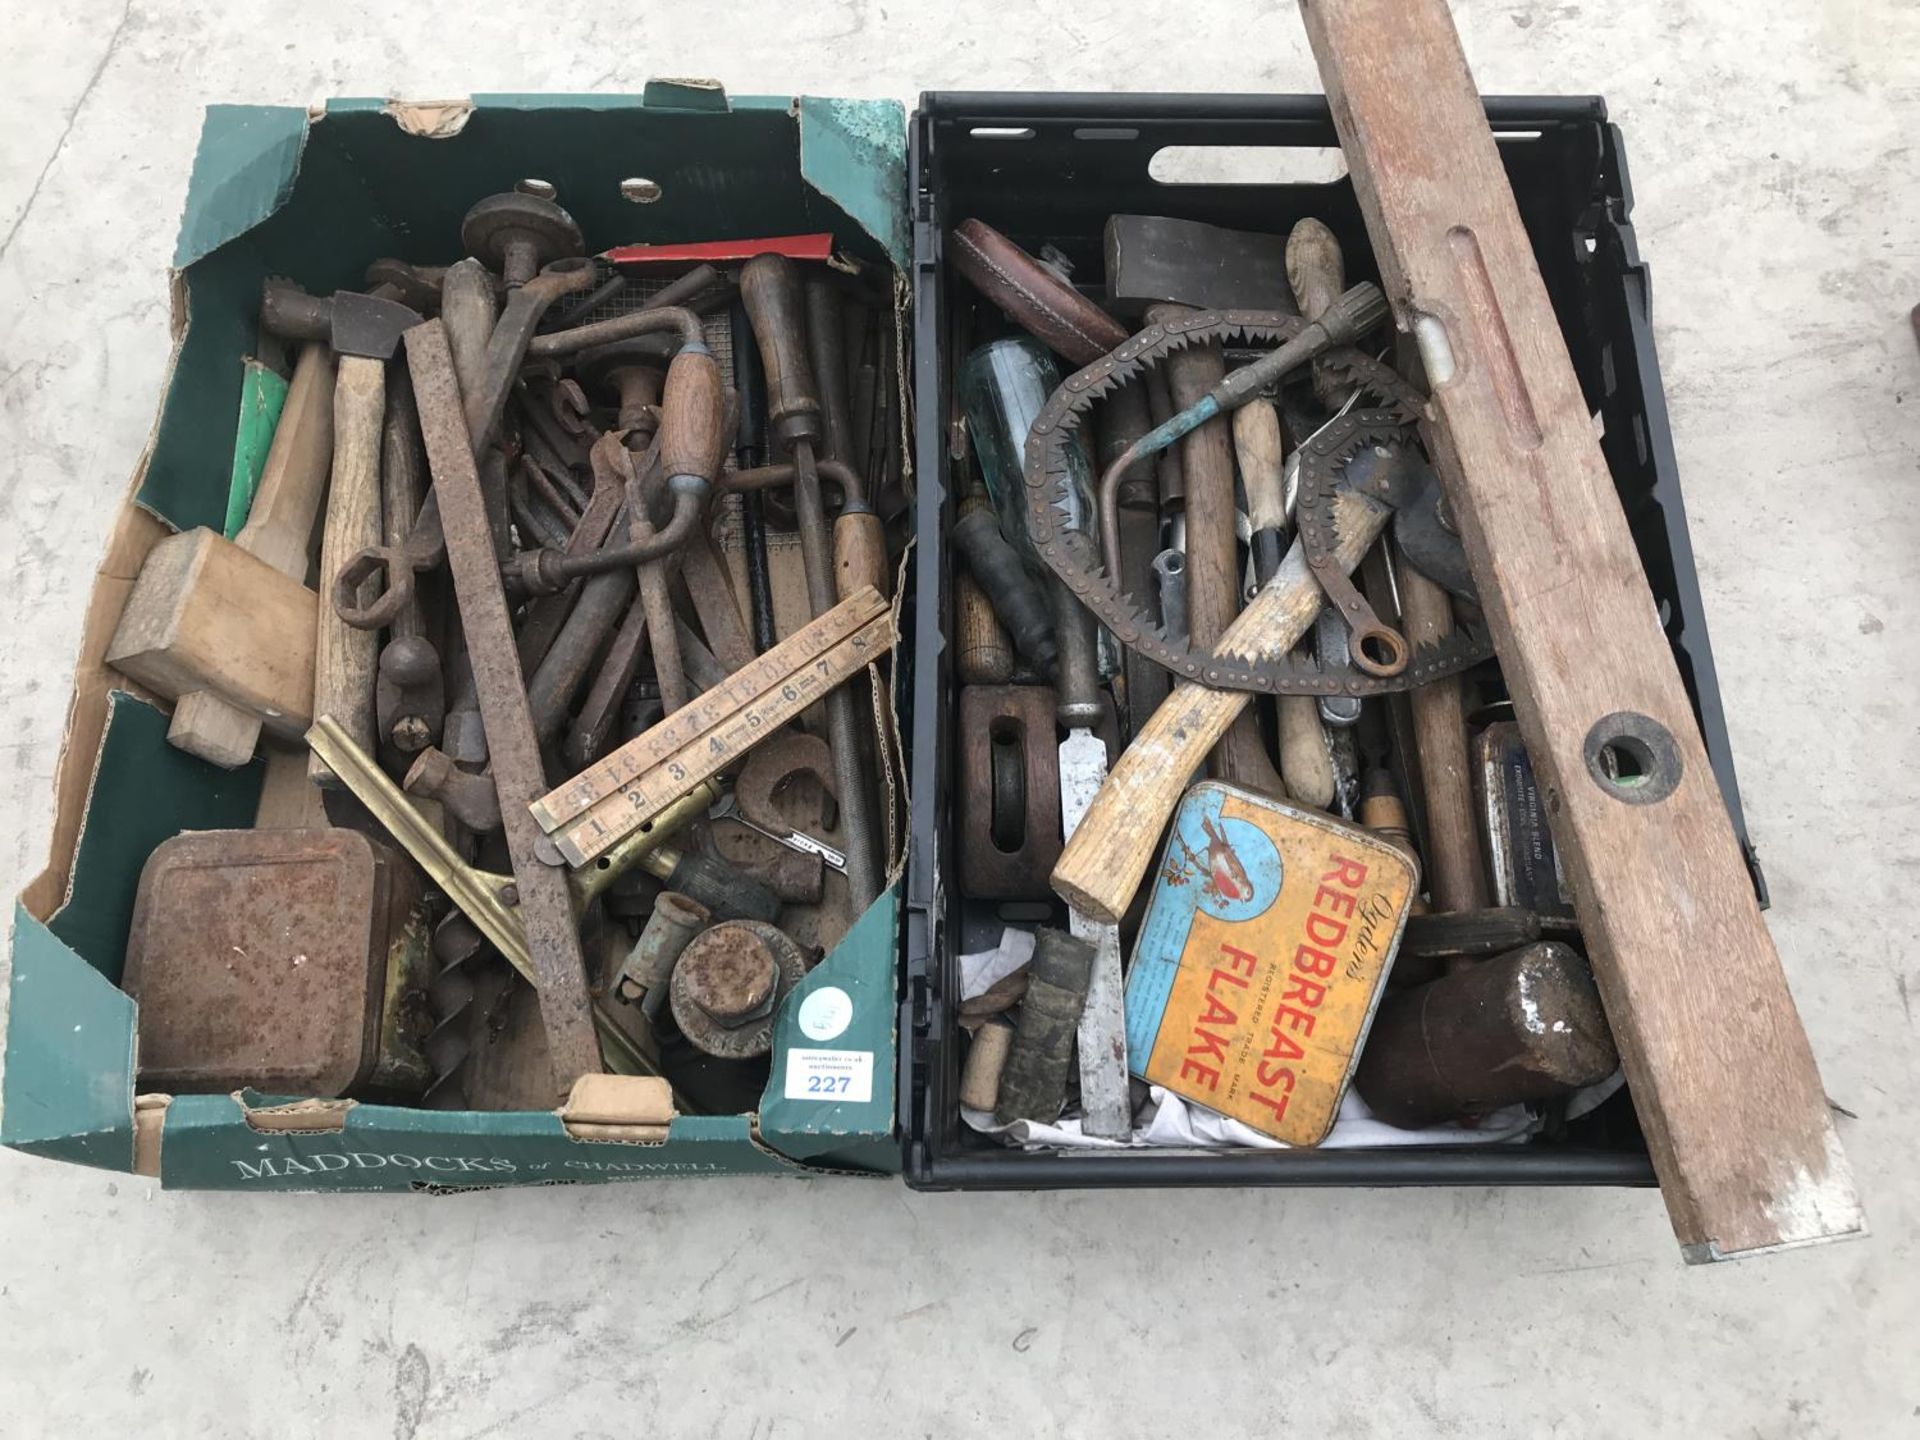 TWO BOXES OF VINTAGE ITEMS TO INCLUDE SPIRIT LEVEL, AXE, HAMMER, TAPE MEASURE, BOTTLE JACK, DRILL